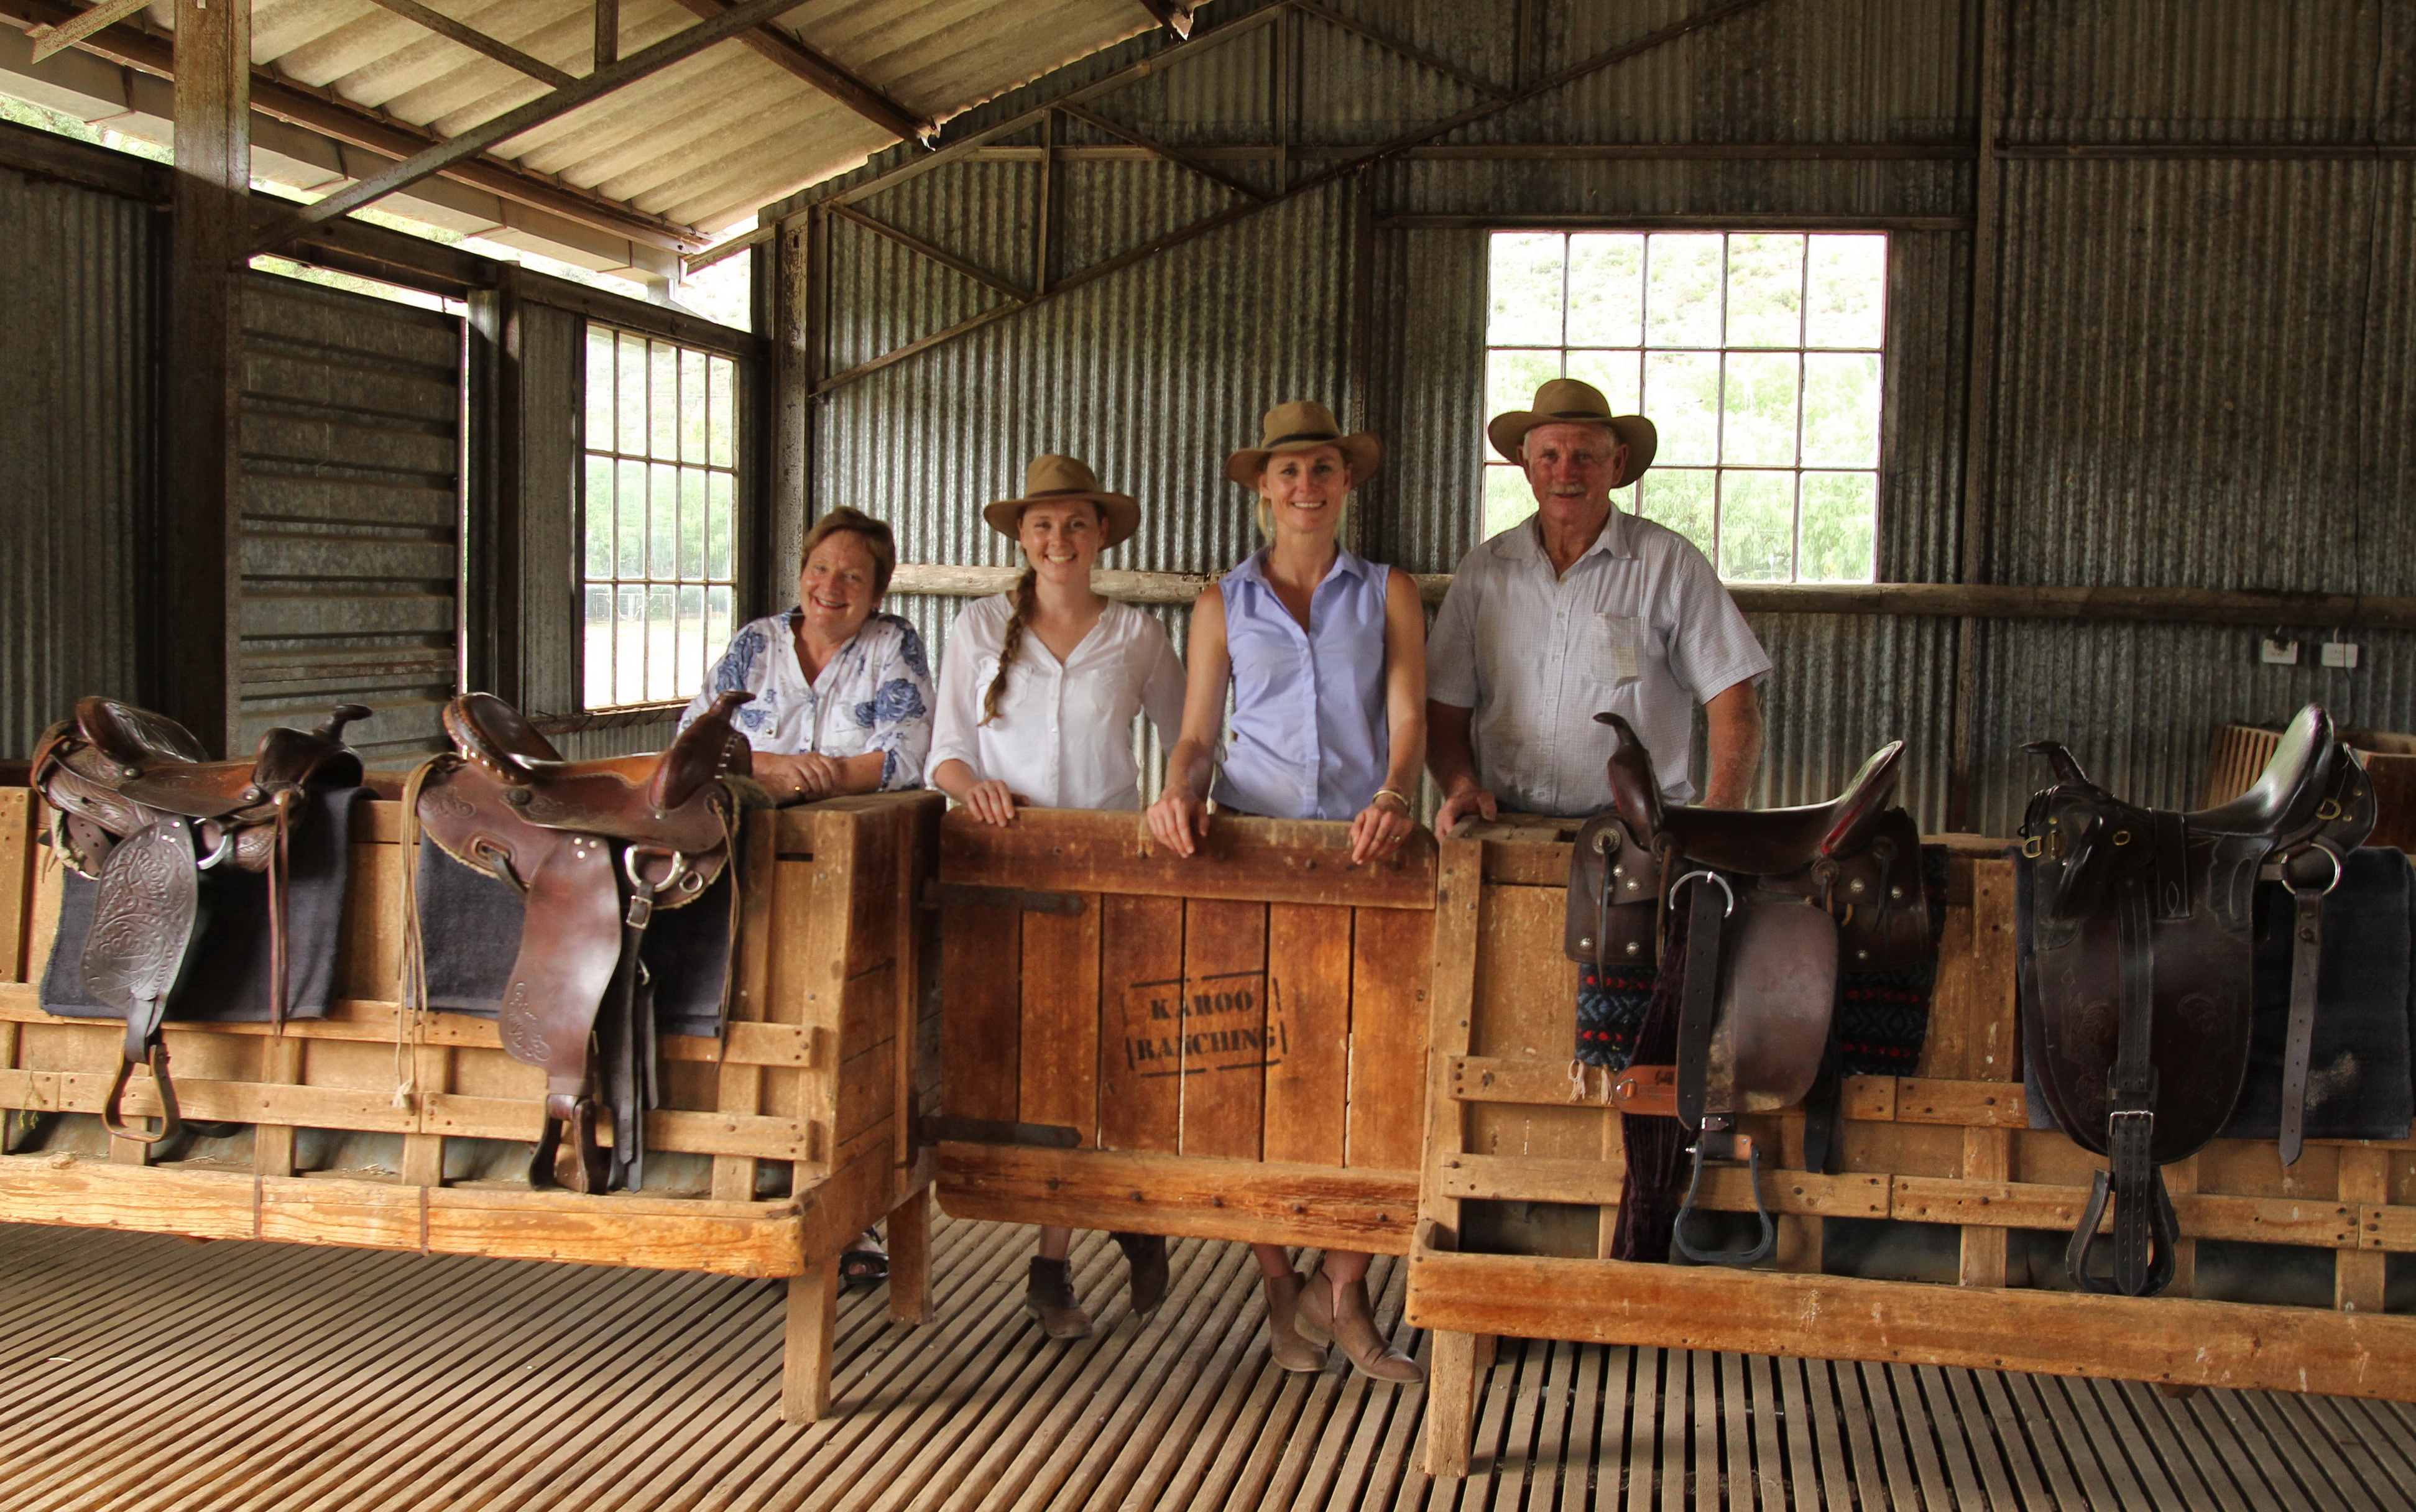 From left, Dickie, Lindy, Julie and Jimmy – family components of Karoo Ranching.